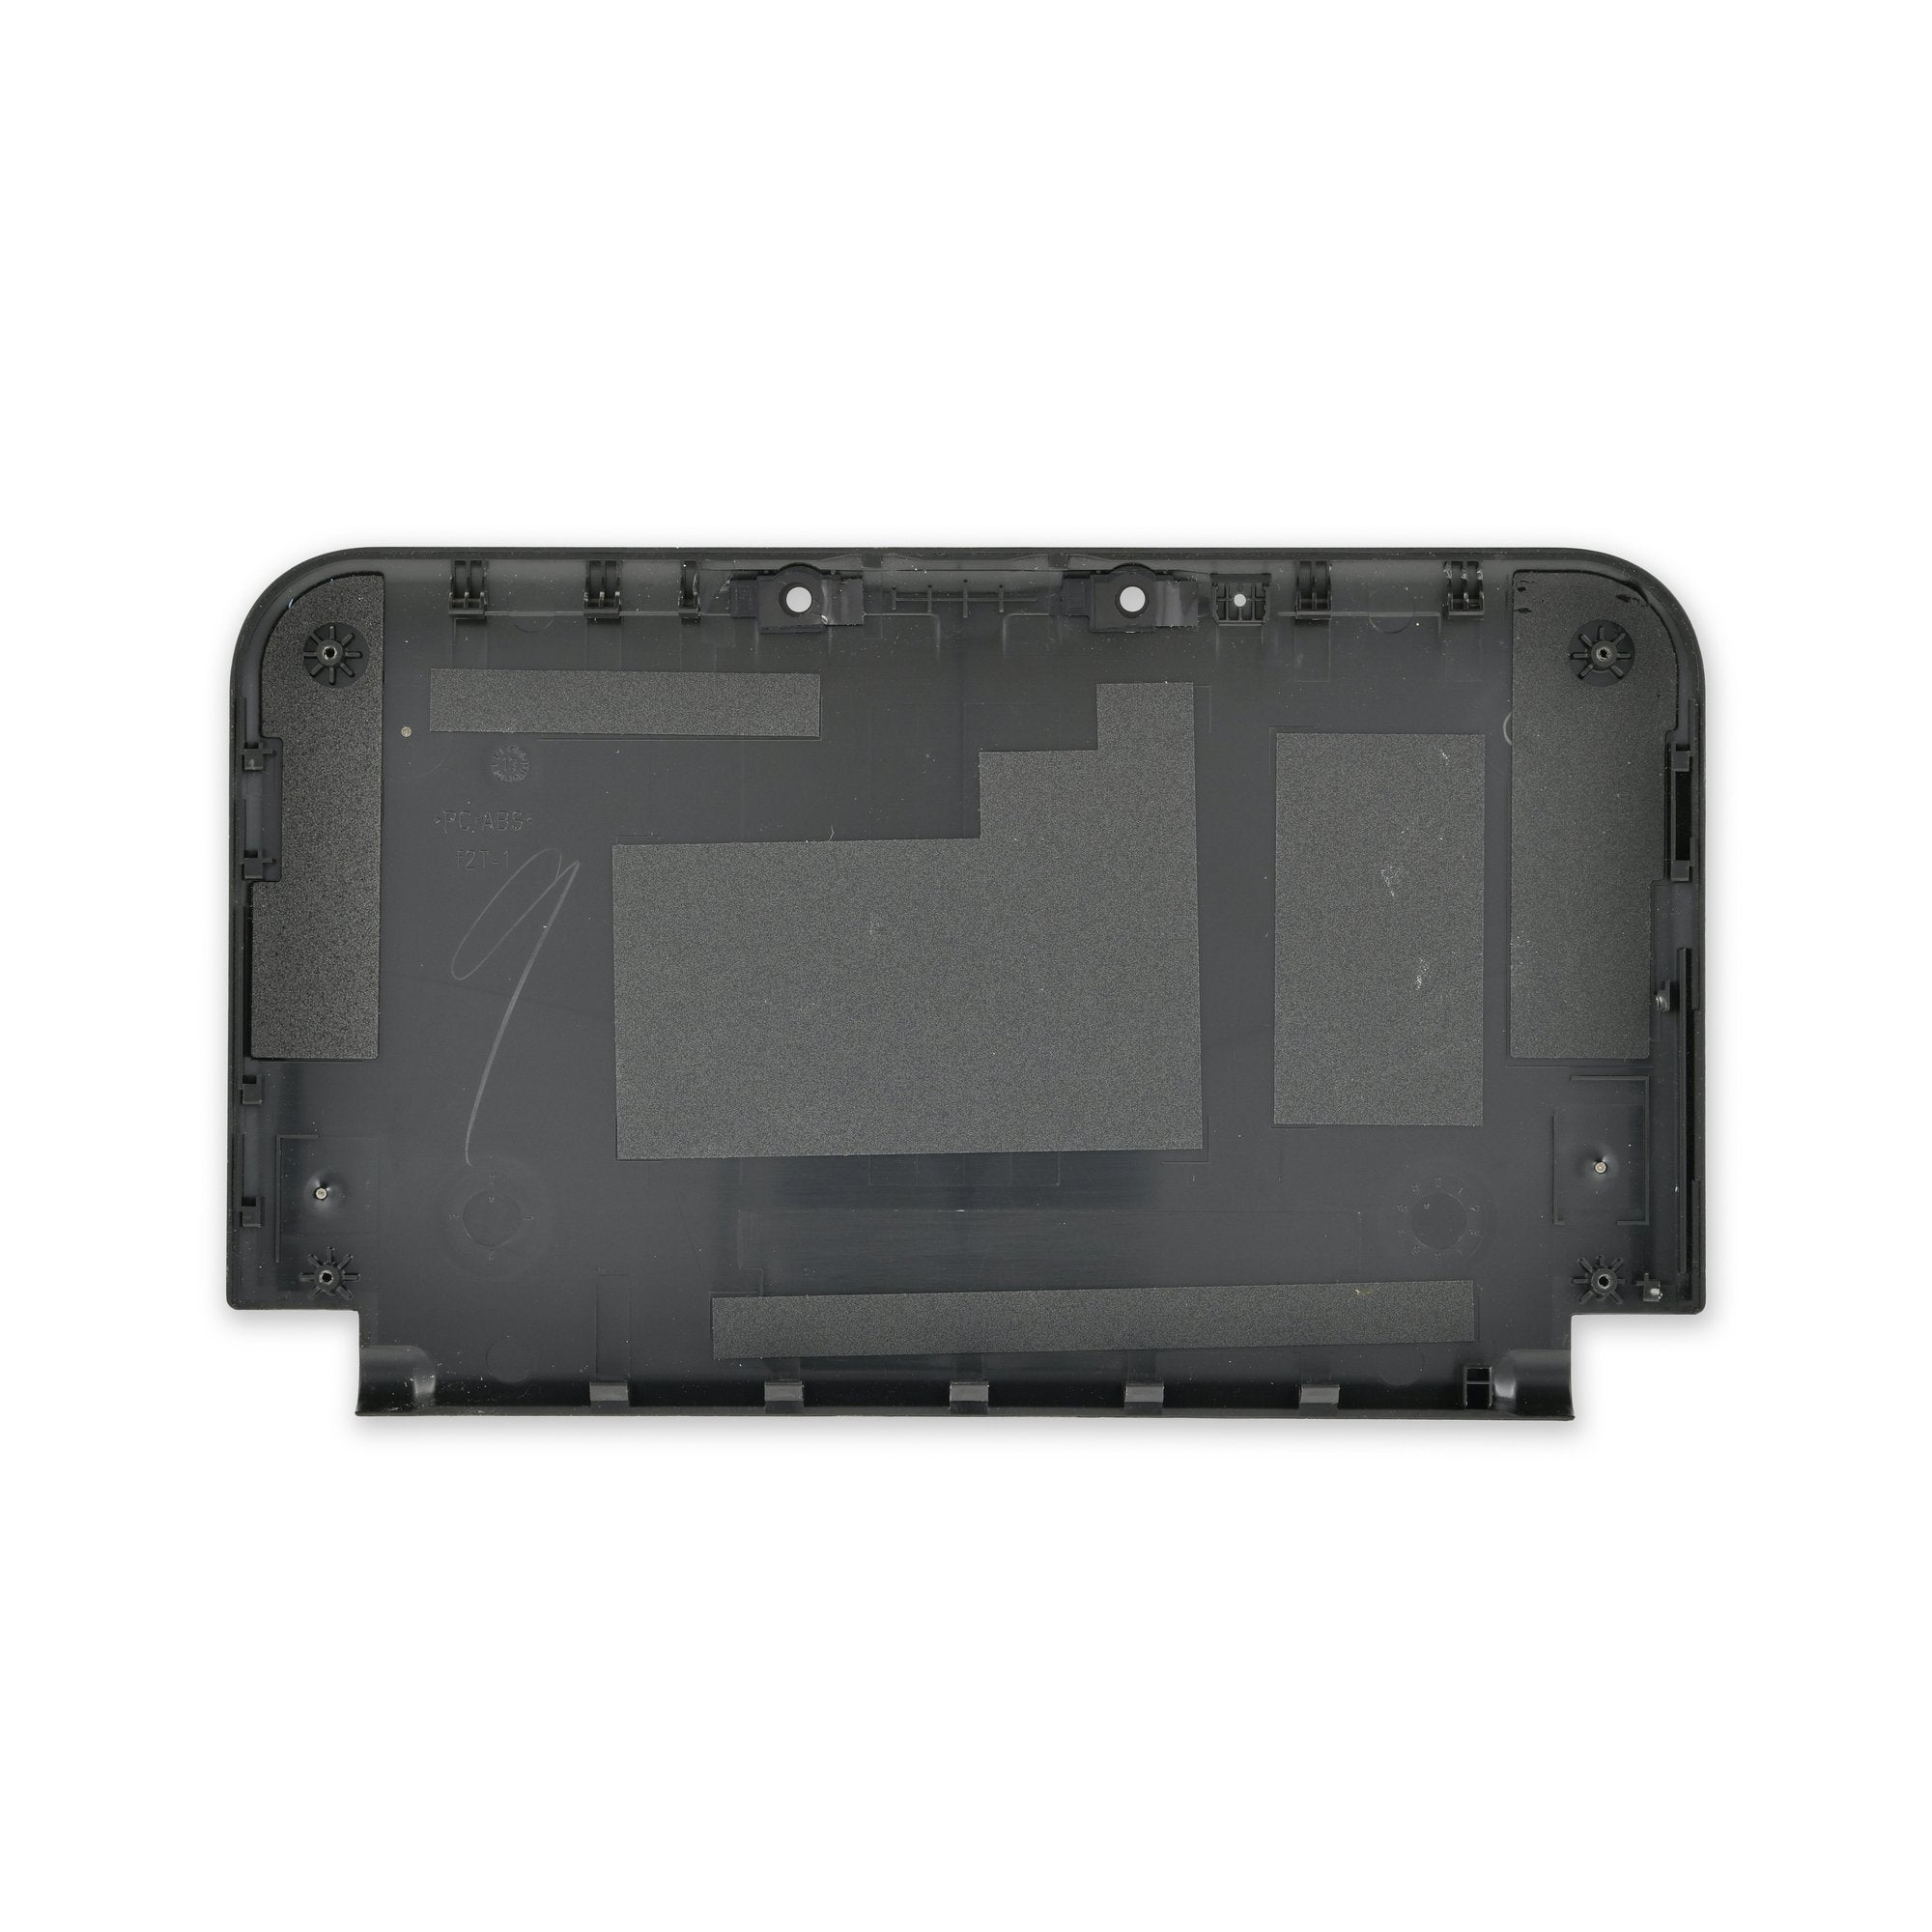 Nintendo 3DS XL Top Panel Blue Used, B-Stock